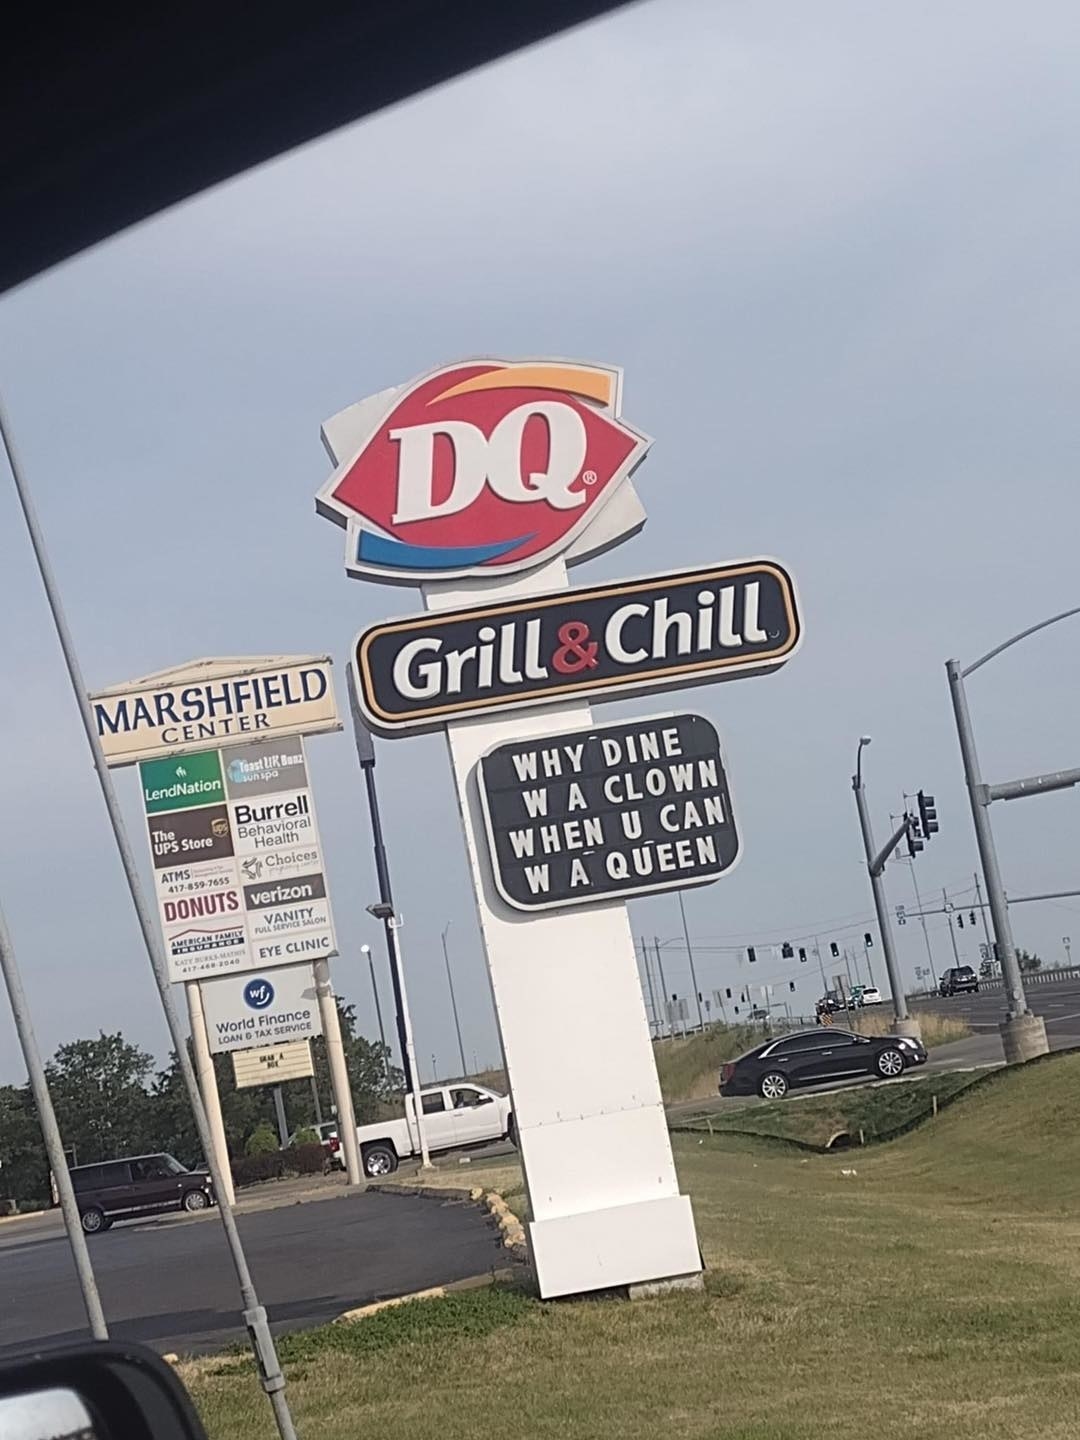 Dairy Queen&#x27;s sign says &quot;Why dine with a clown when you can with a queen&quot;